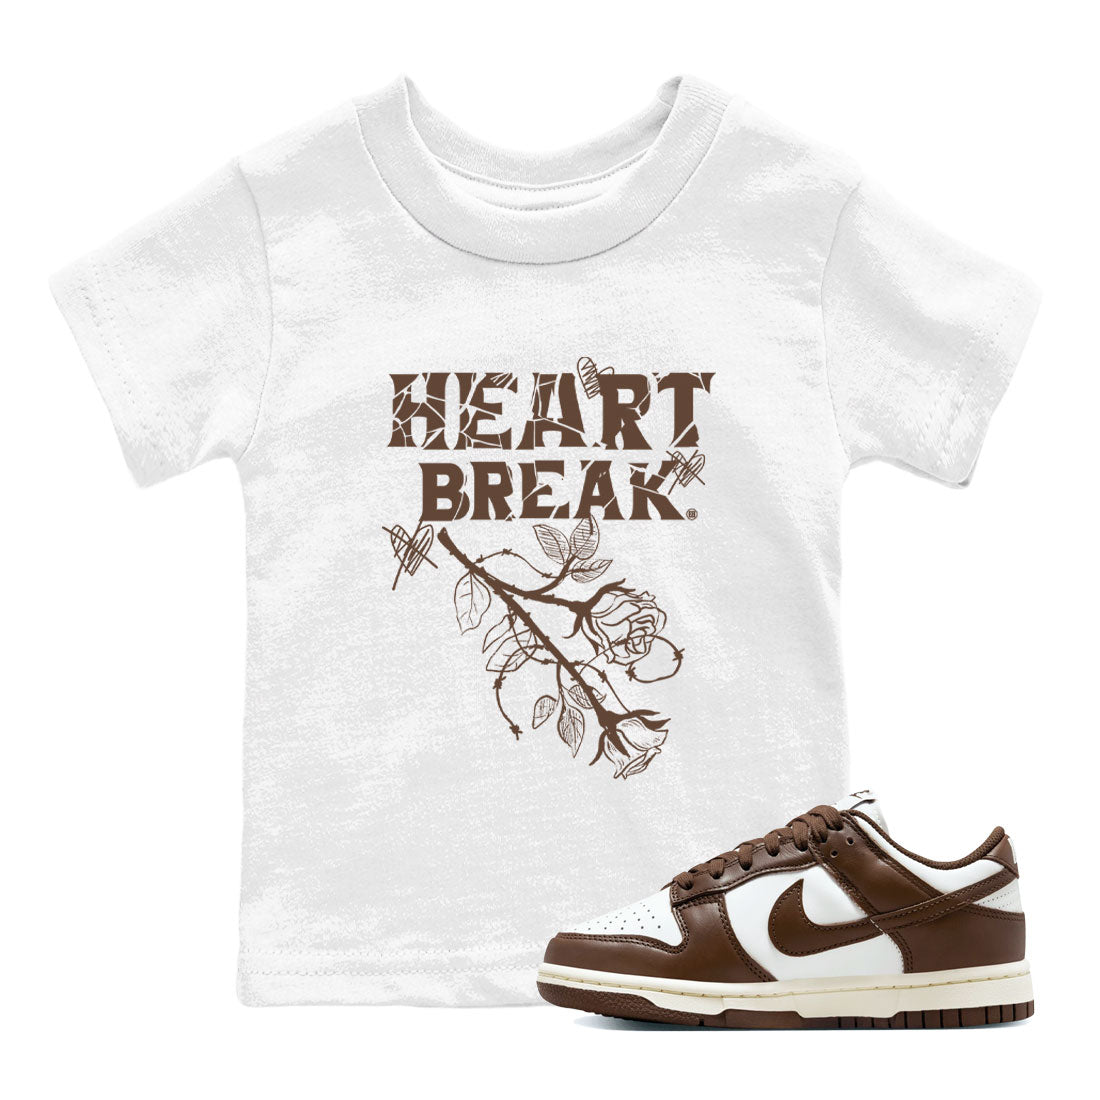 Dunk Low WMNS Cacao Wow sneaker shirt to match jordans Heart Break sneaker tees Dunk Cacao Wow SNRT Sneaker Release Tees Baby Toddler White 1 T-Shirt